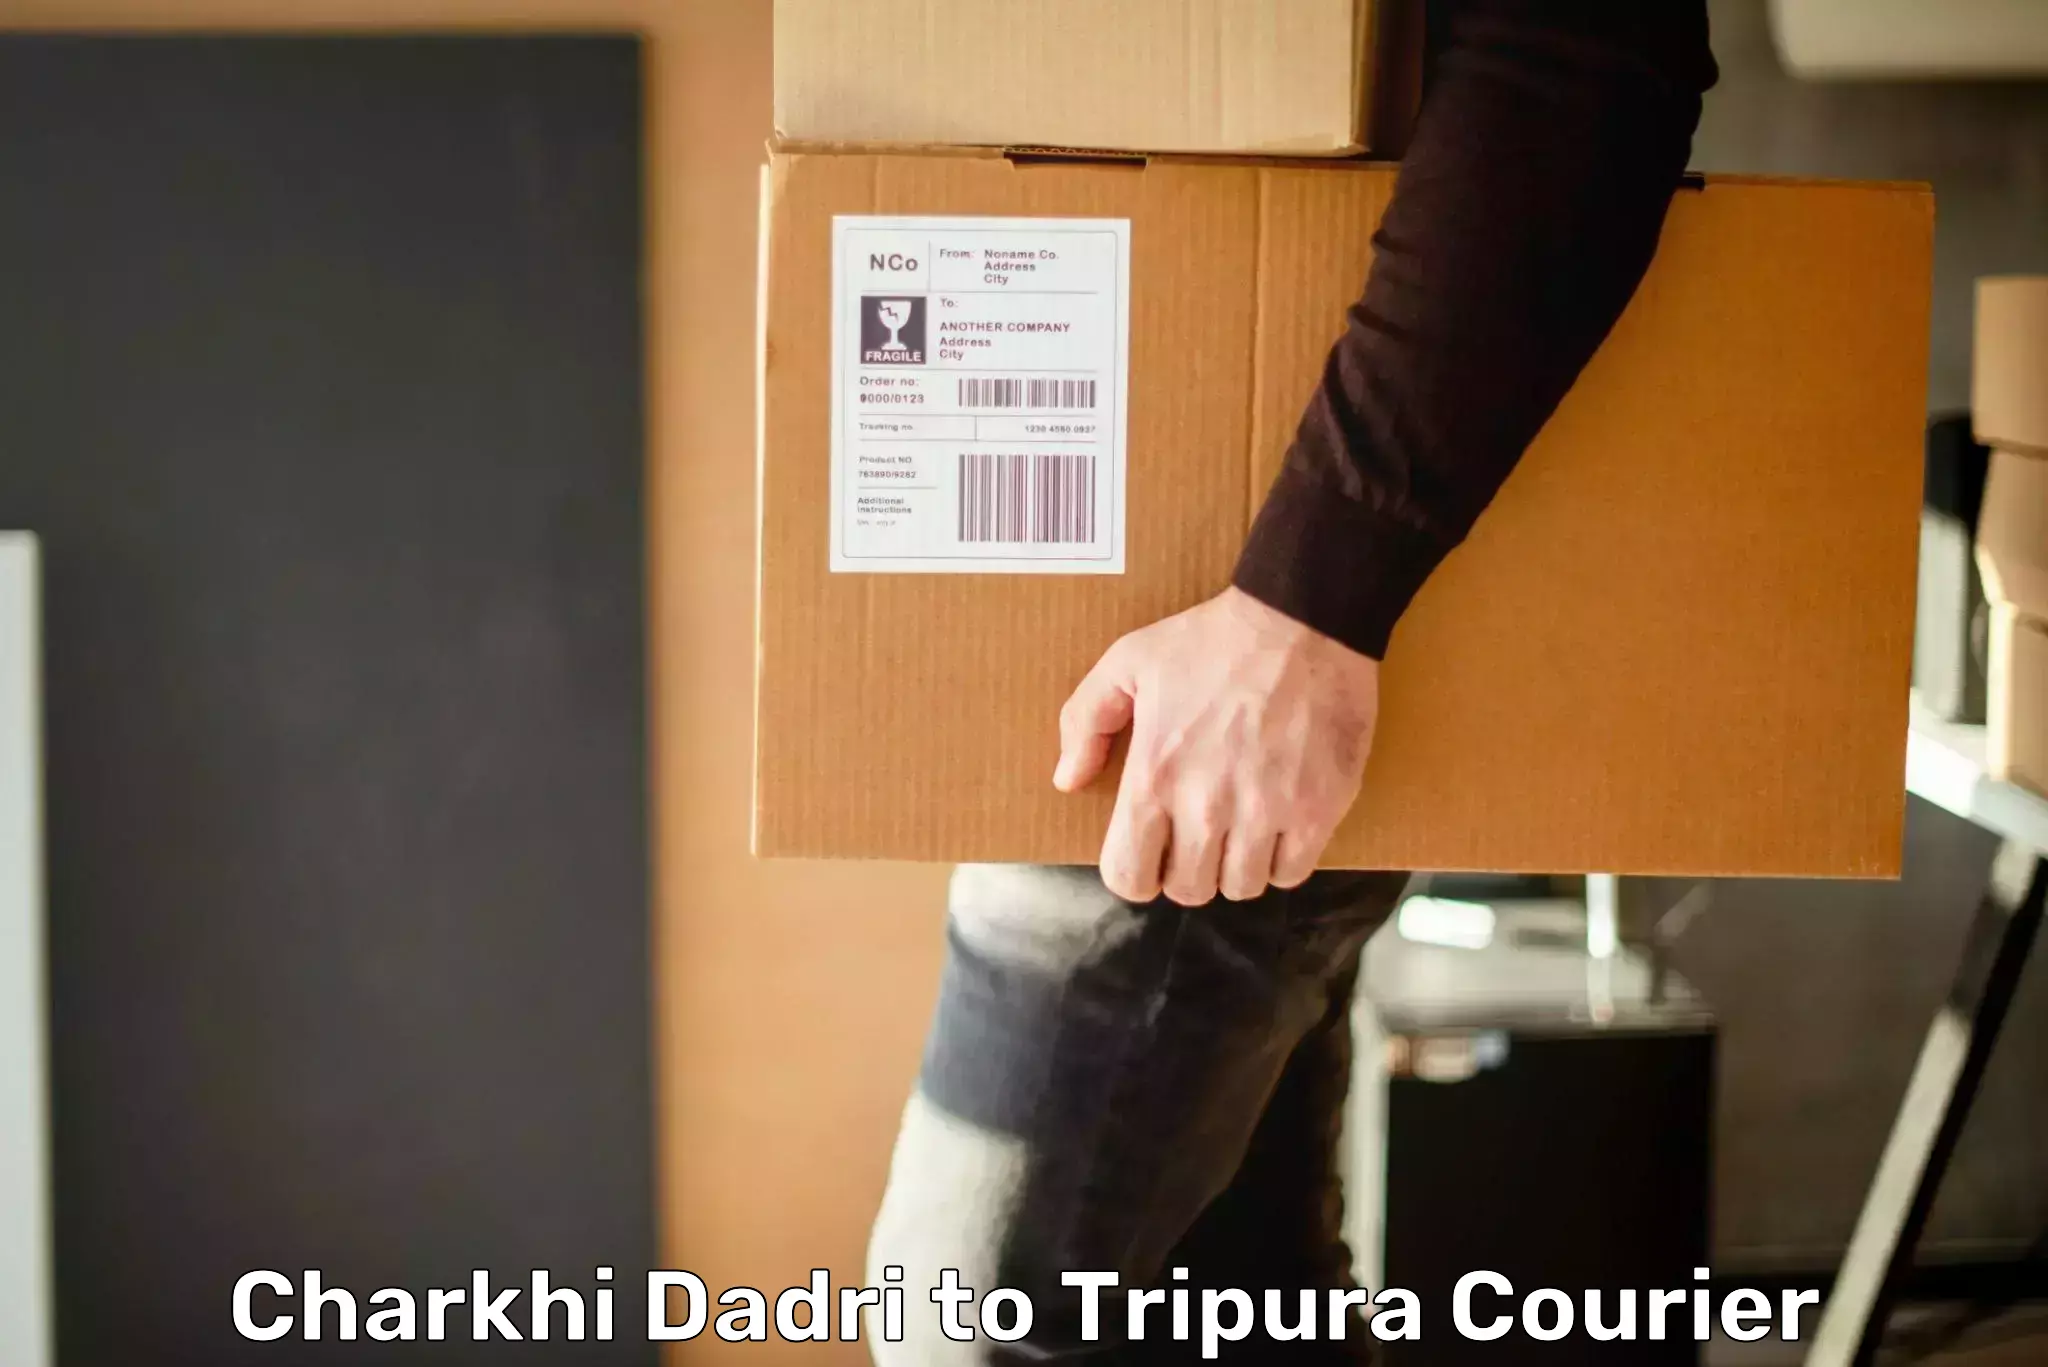 Reliable delivery network Charkhi Dadri to Udaipur Tripura